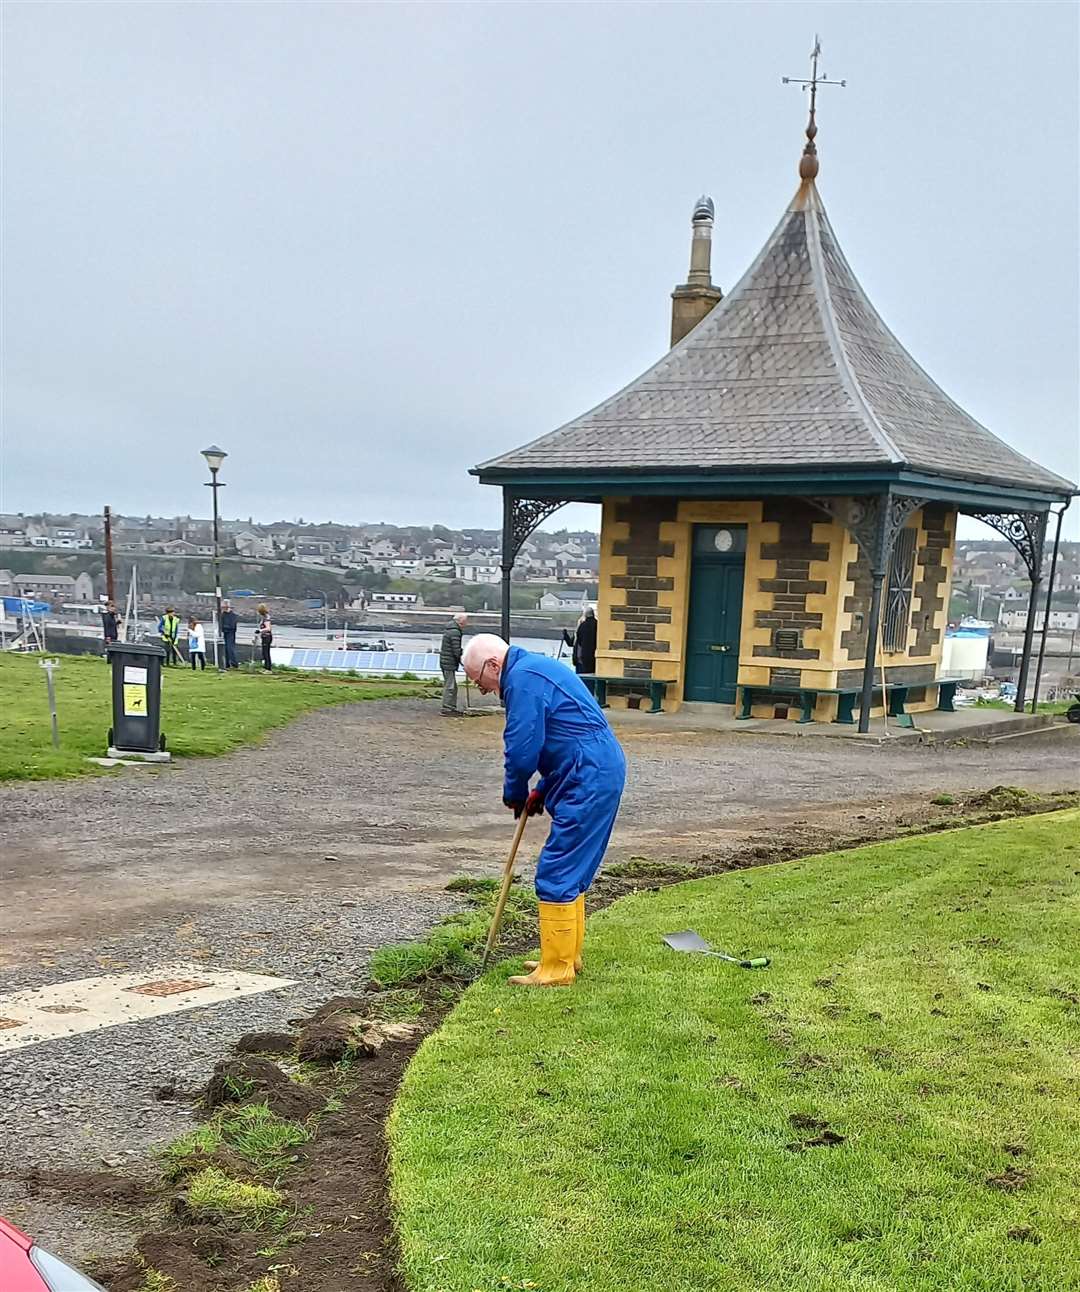 Straightening a verge near the Pilot House in readiness for Saturday's memorial event.